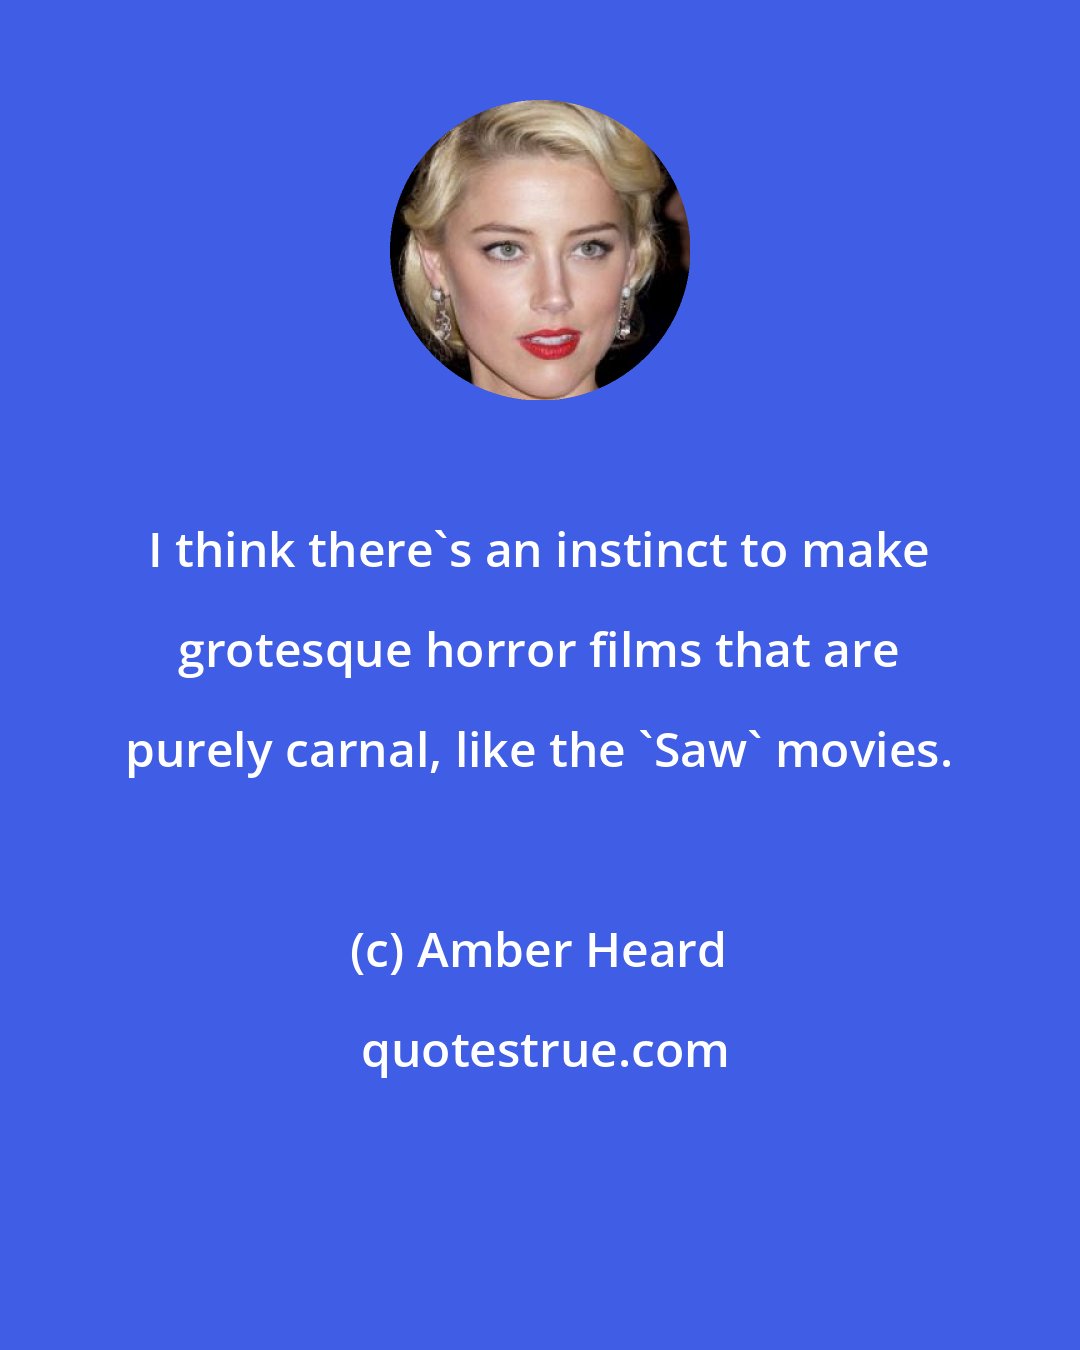 Amber Heard: I think there's an instinct to make grotesque horror films that are purely carnal, like the 'Saw' movies.